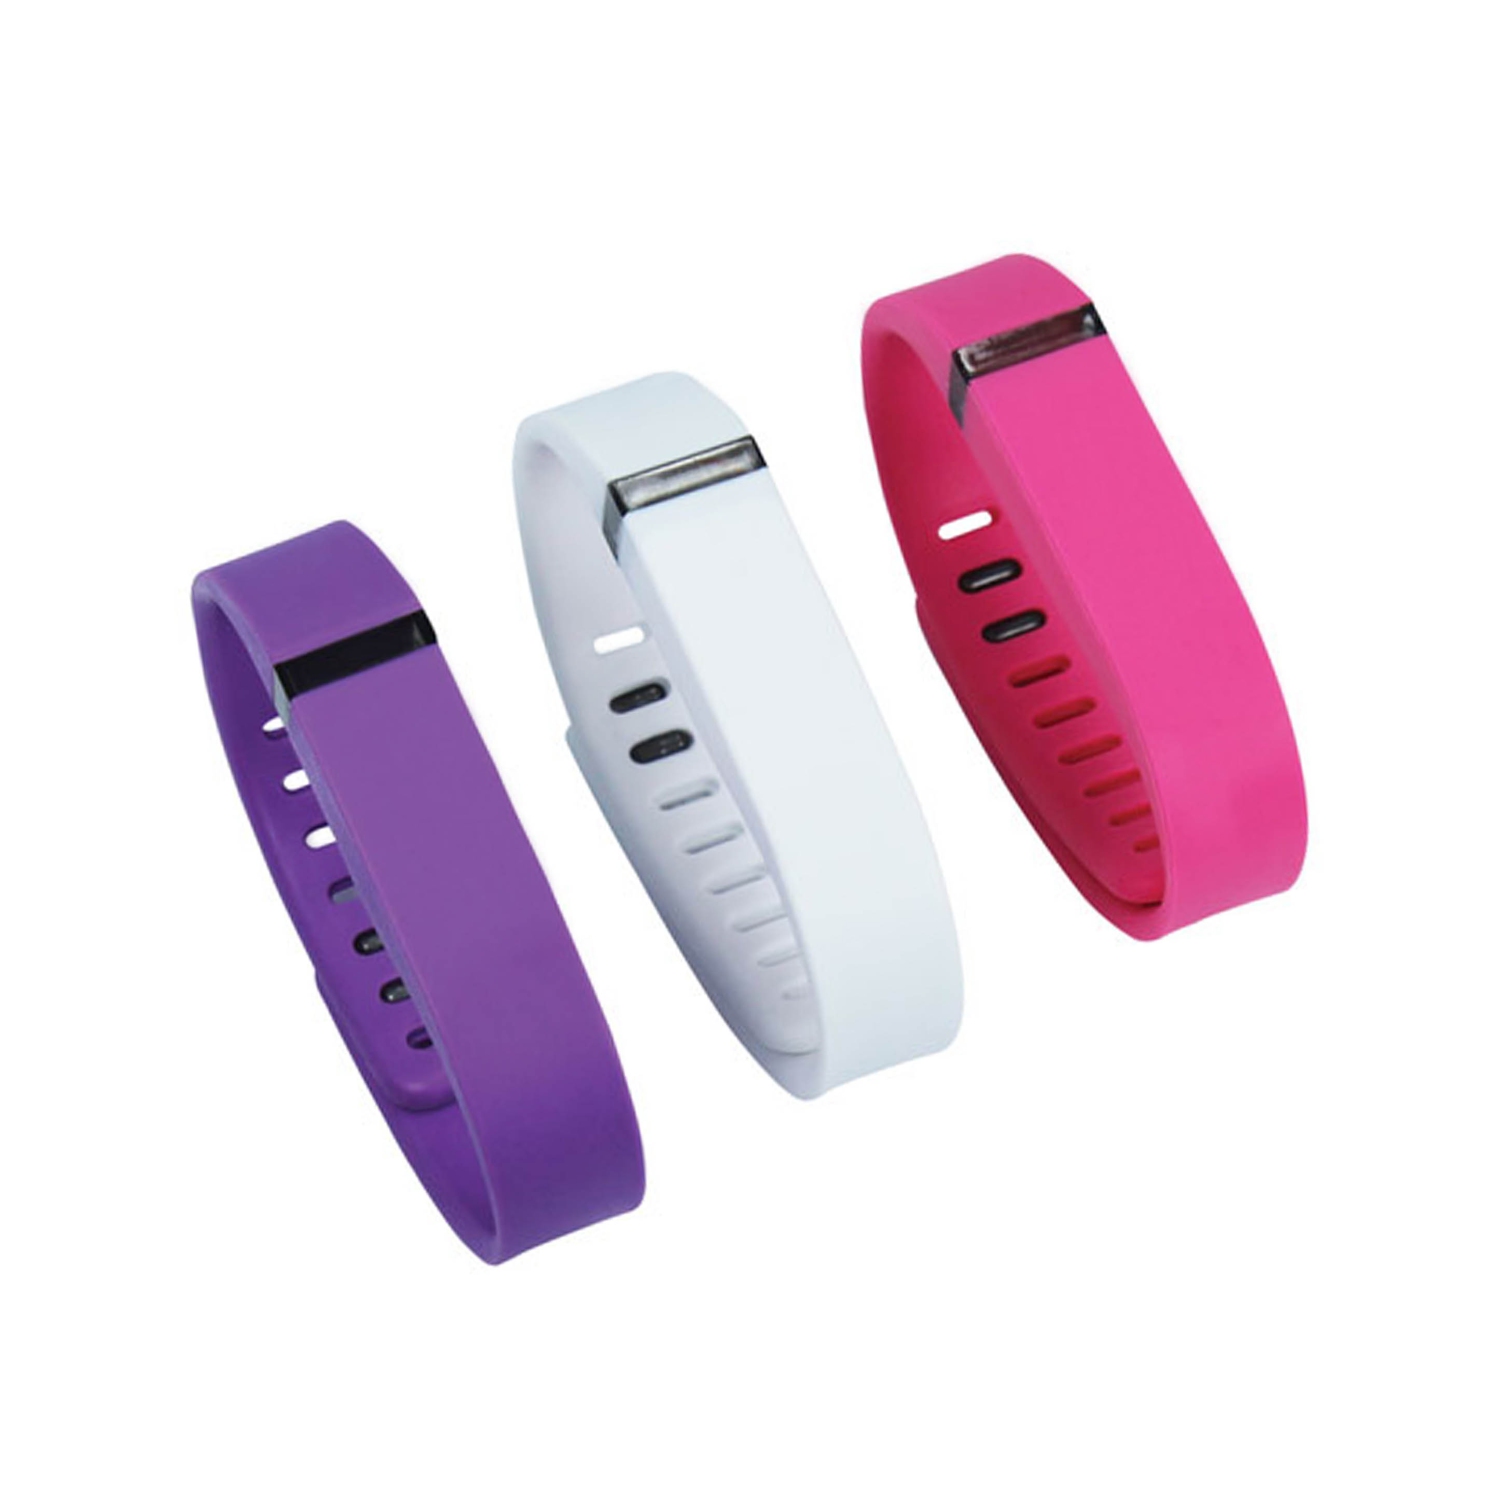 Adreama Silicone Replacement Band for Fitbit Flex - 3 pack (Purple/White/Pink)